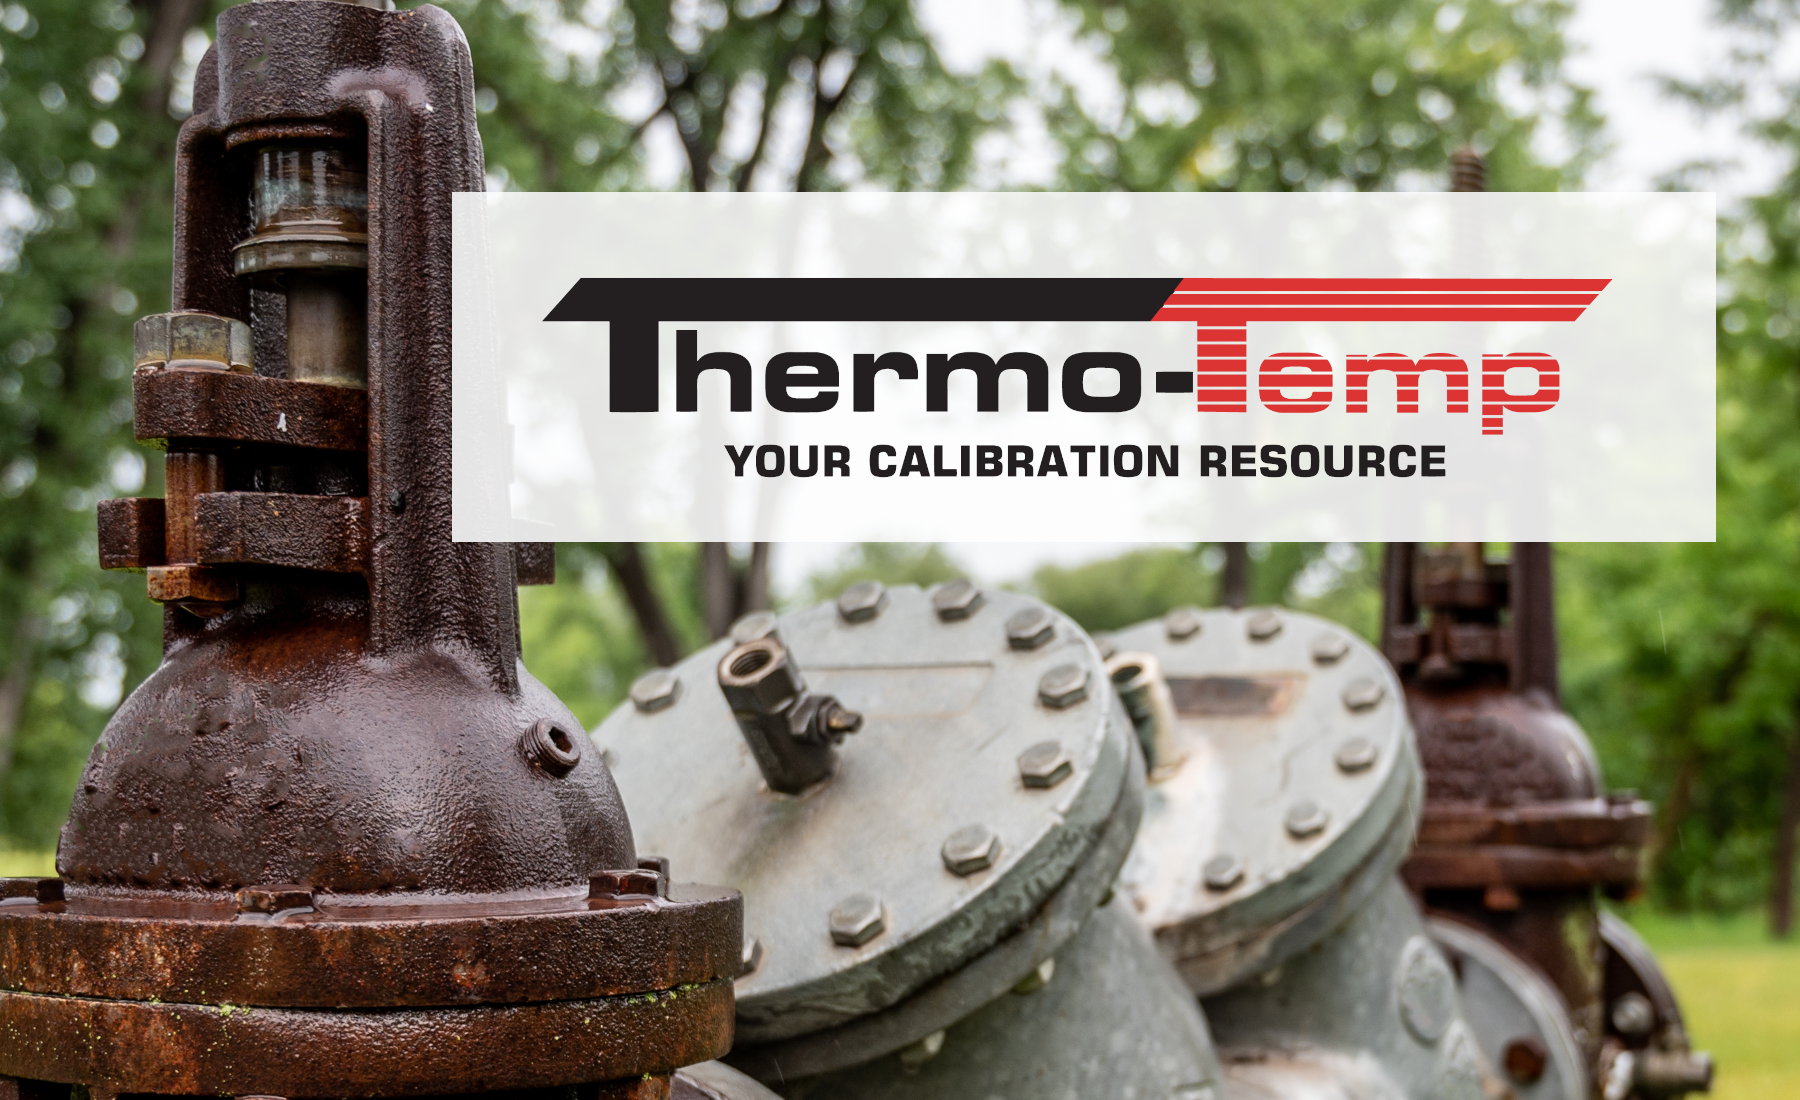 An old backflow preventer in a field with Thermo-Temp logo over top of the image.